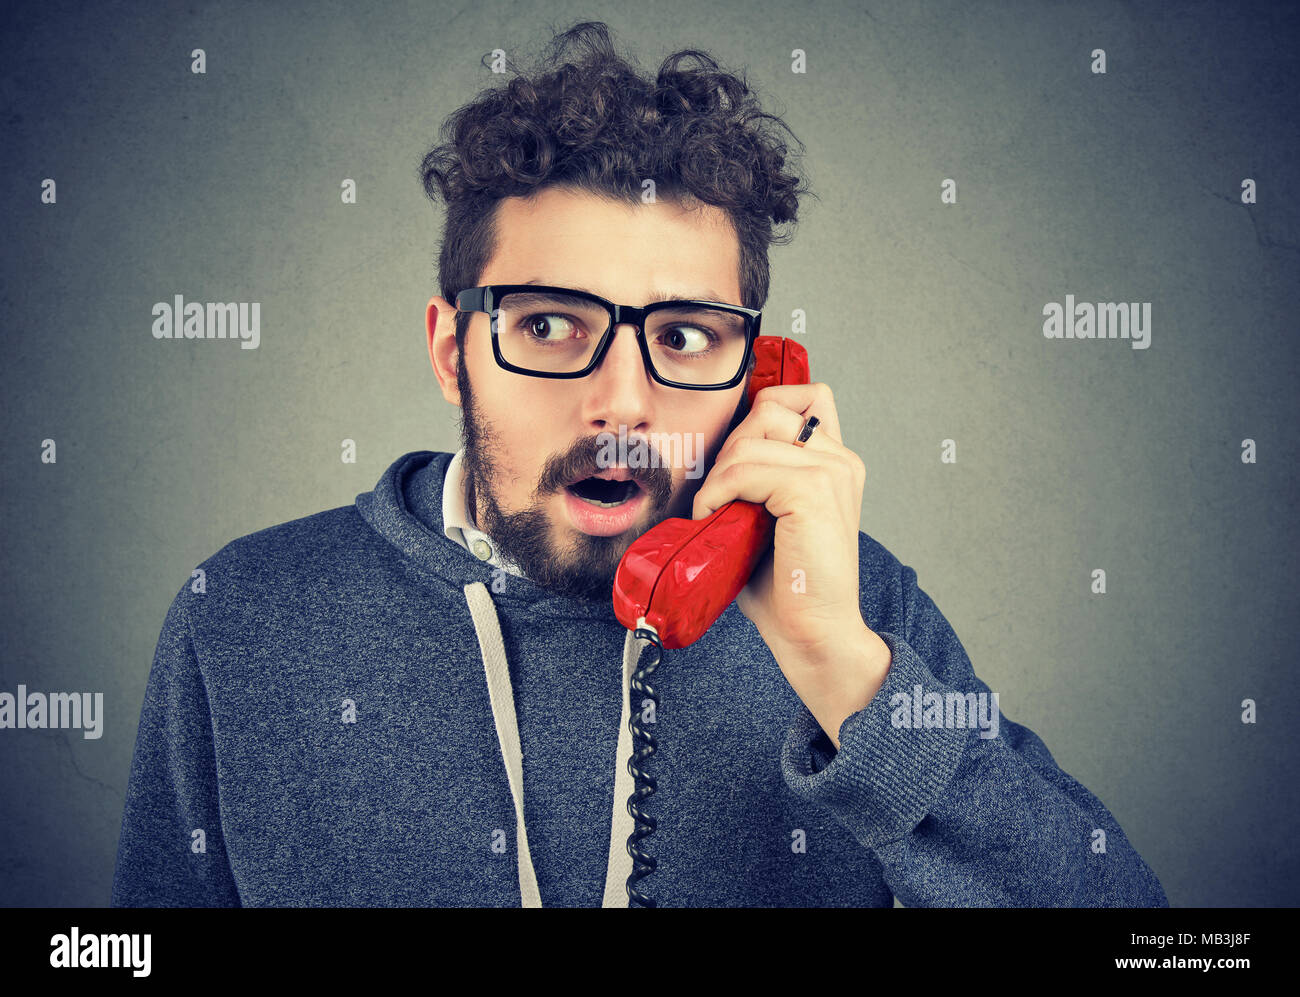 Stunned young man receiving unexpected news over the phone Stock Photo